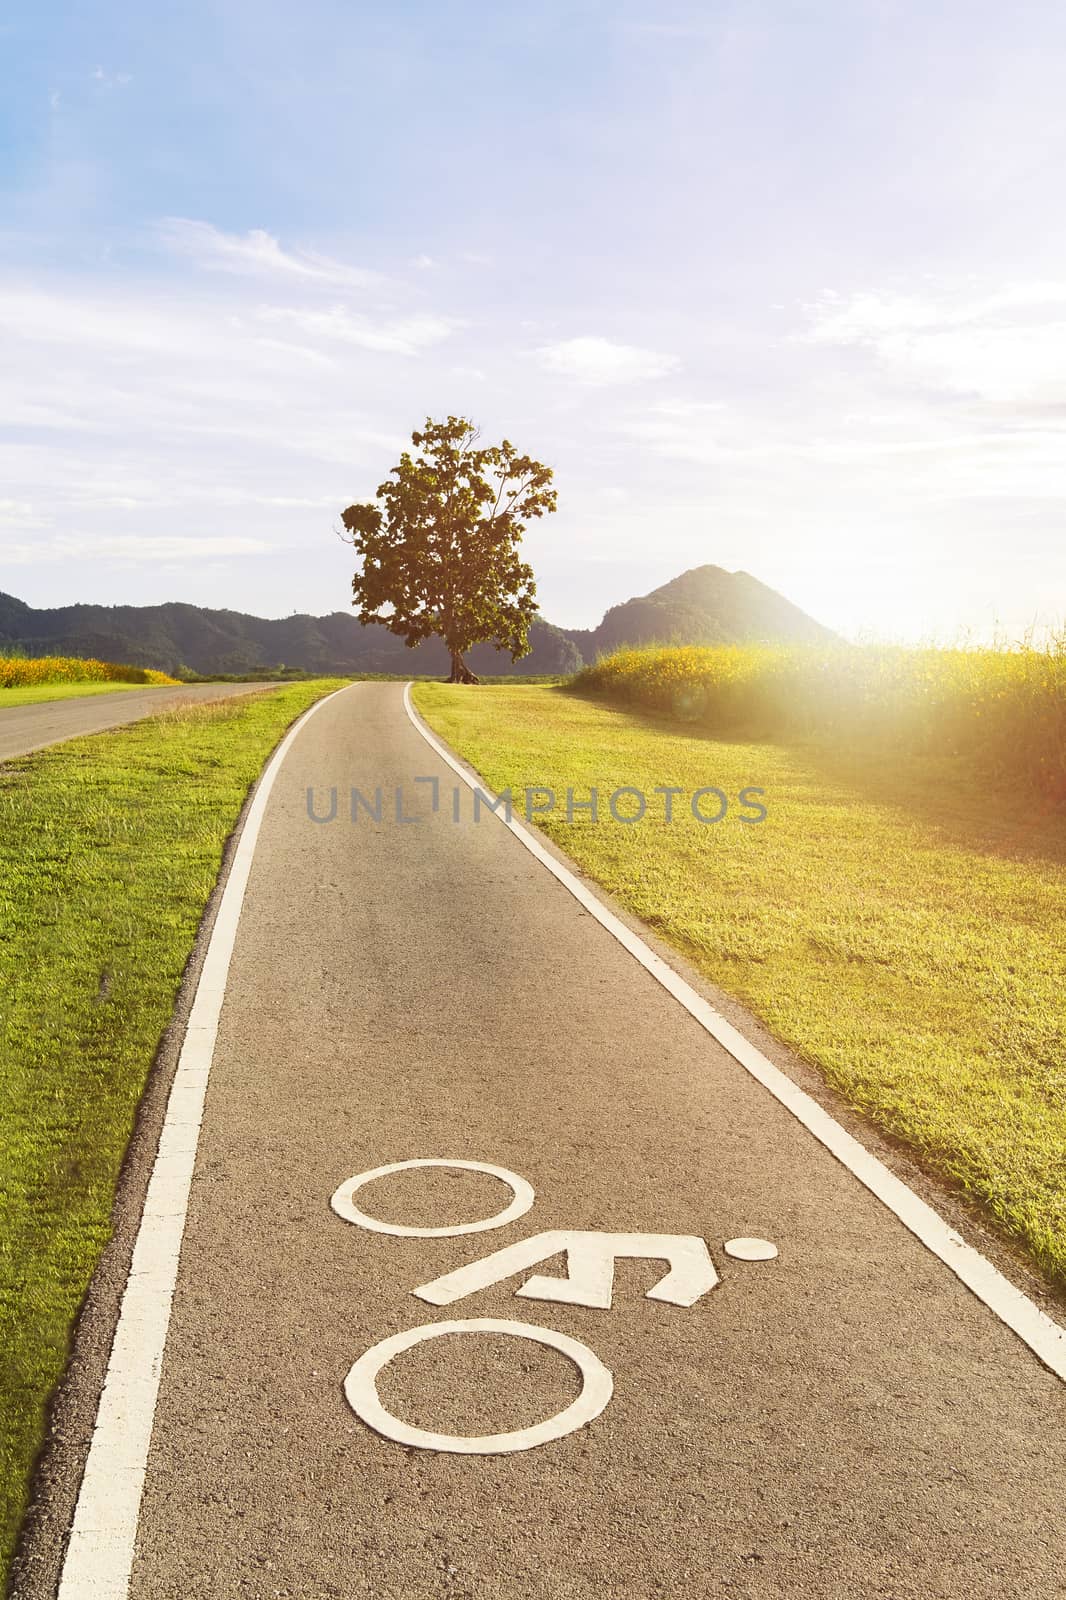 Scenery bicycle lane on a hill with a tree. by Tanarch